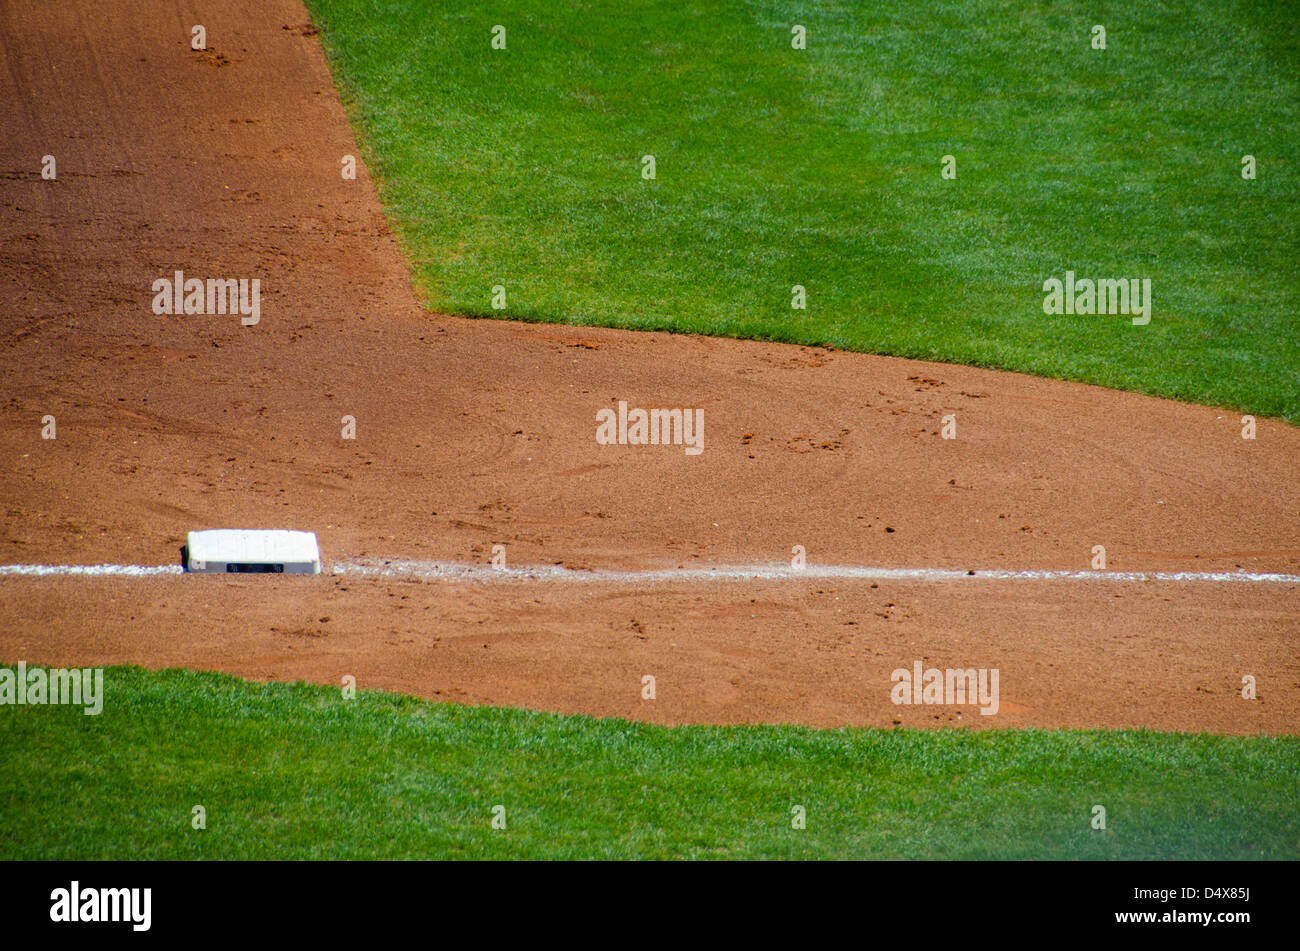 Abstract background texture of the brown dirt and green grass of a professional baseball field with third base line and base Stock Photo